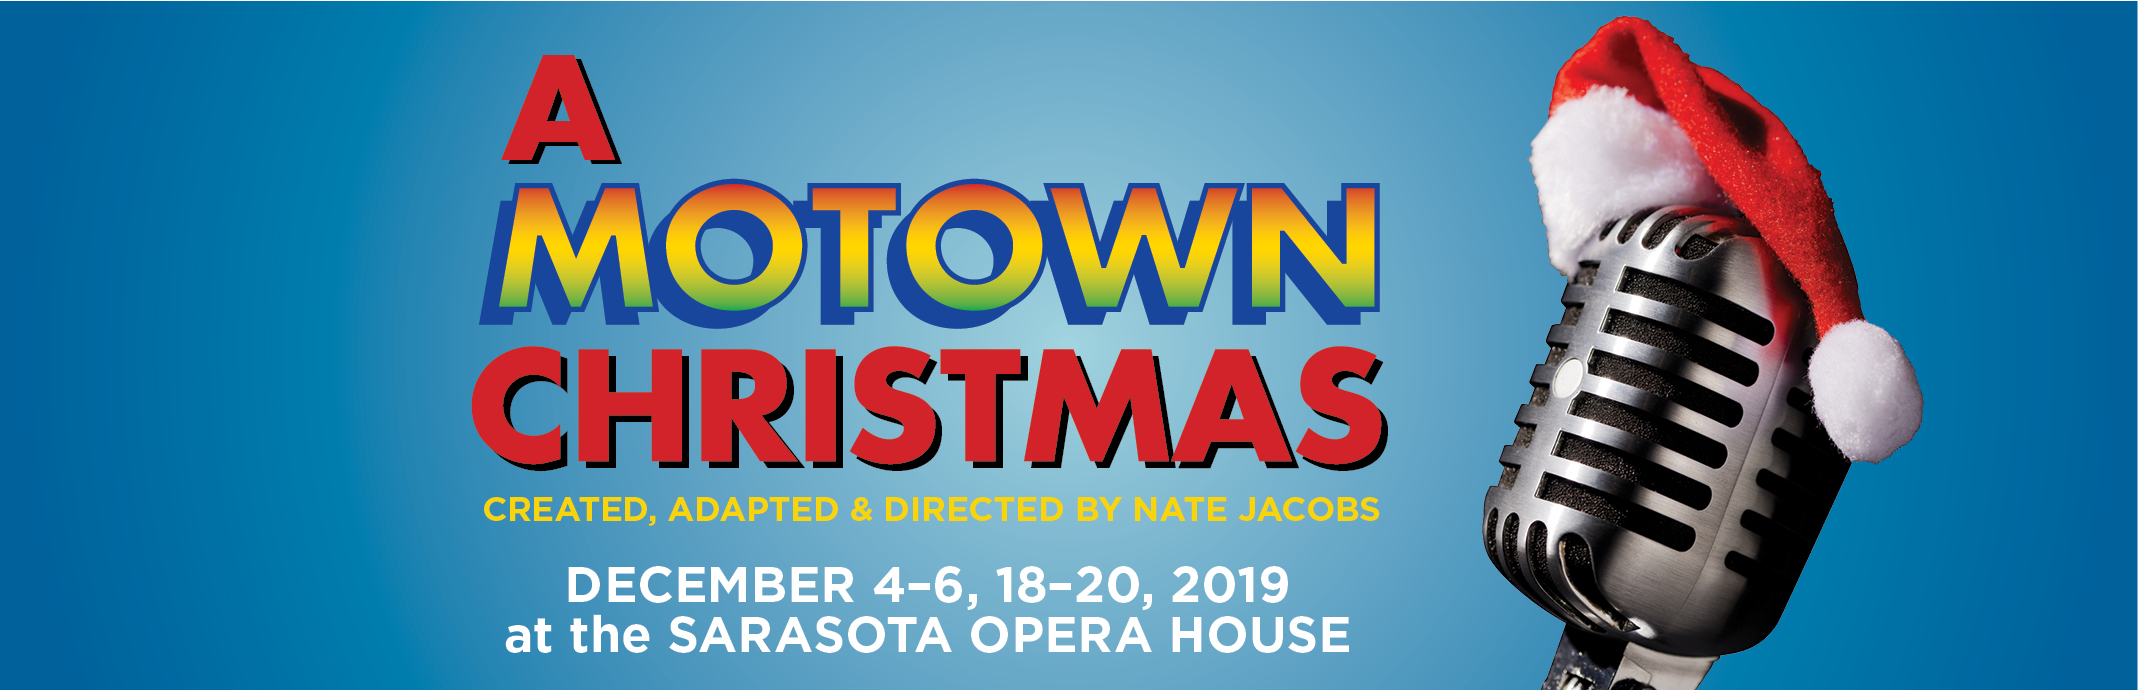 A Motown Christmas; Created, Adapted, and Directed by Nate Jacobs; December 4-6, 18-20, 2019 at the Sarasota Opera House